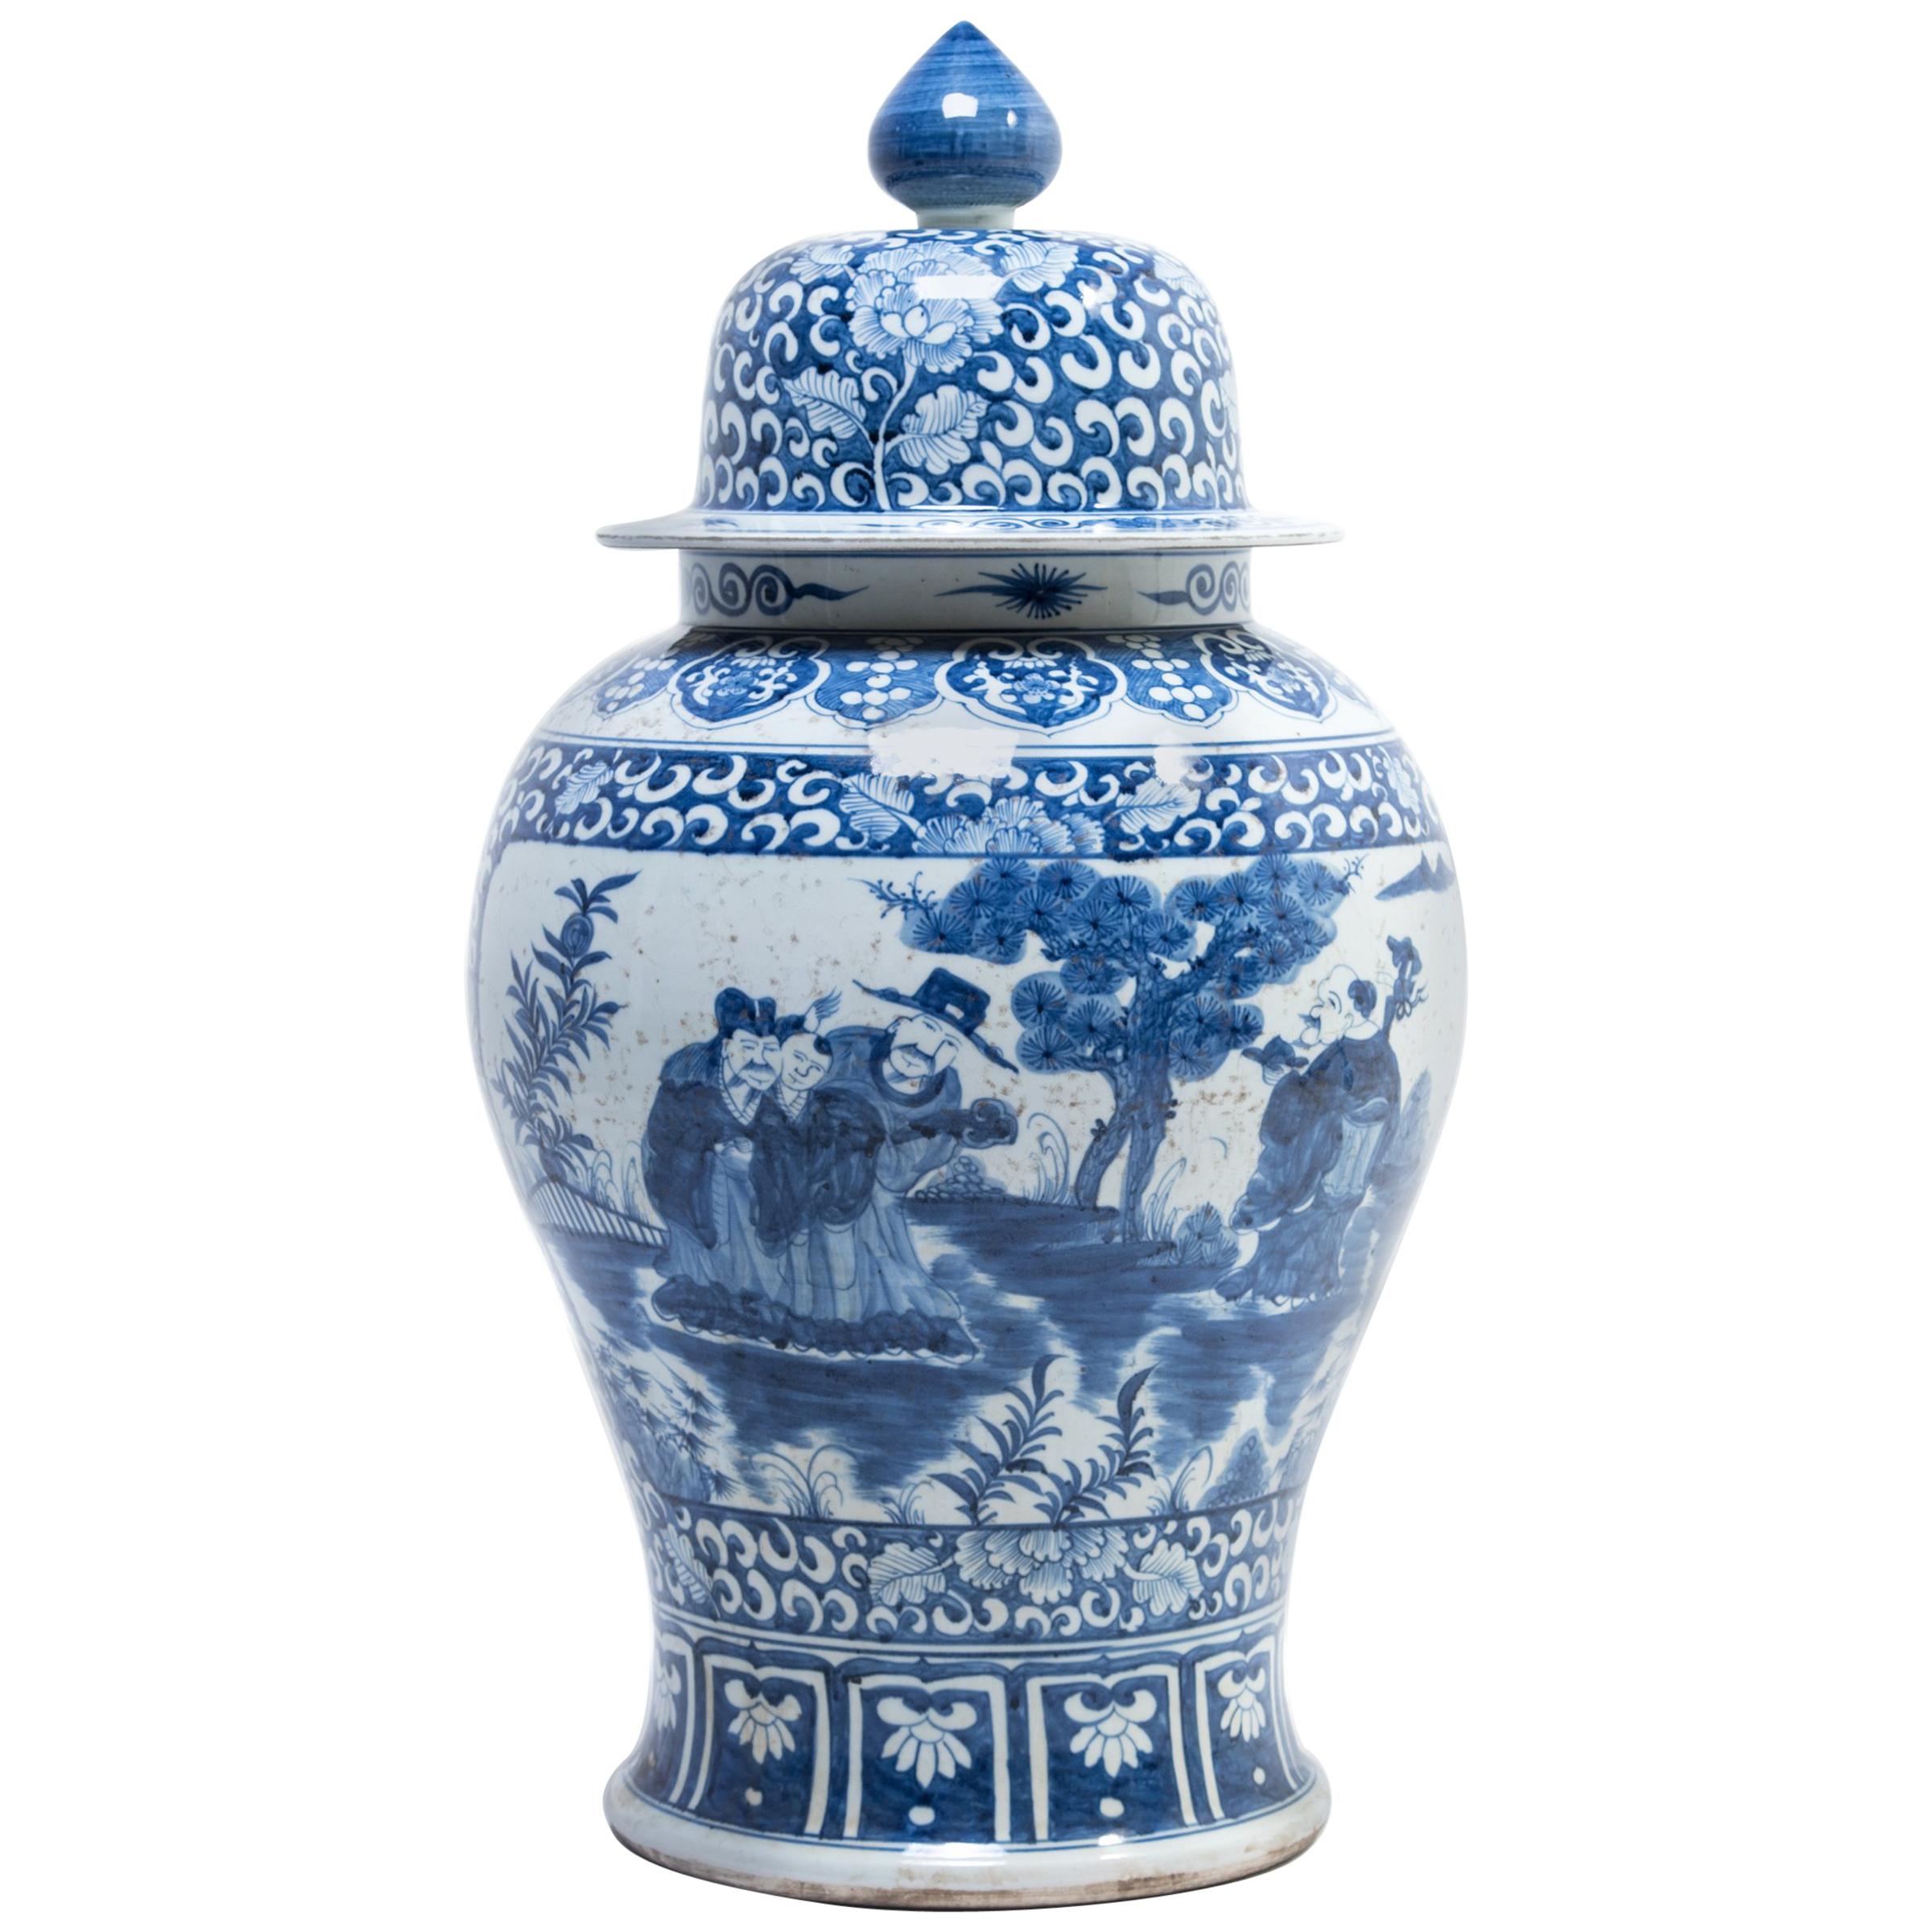 Chinese Blue and White Ginger Jar with Landscape Portraits